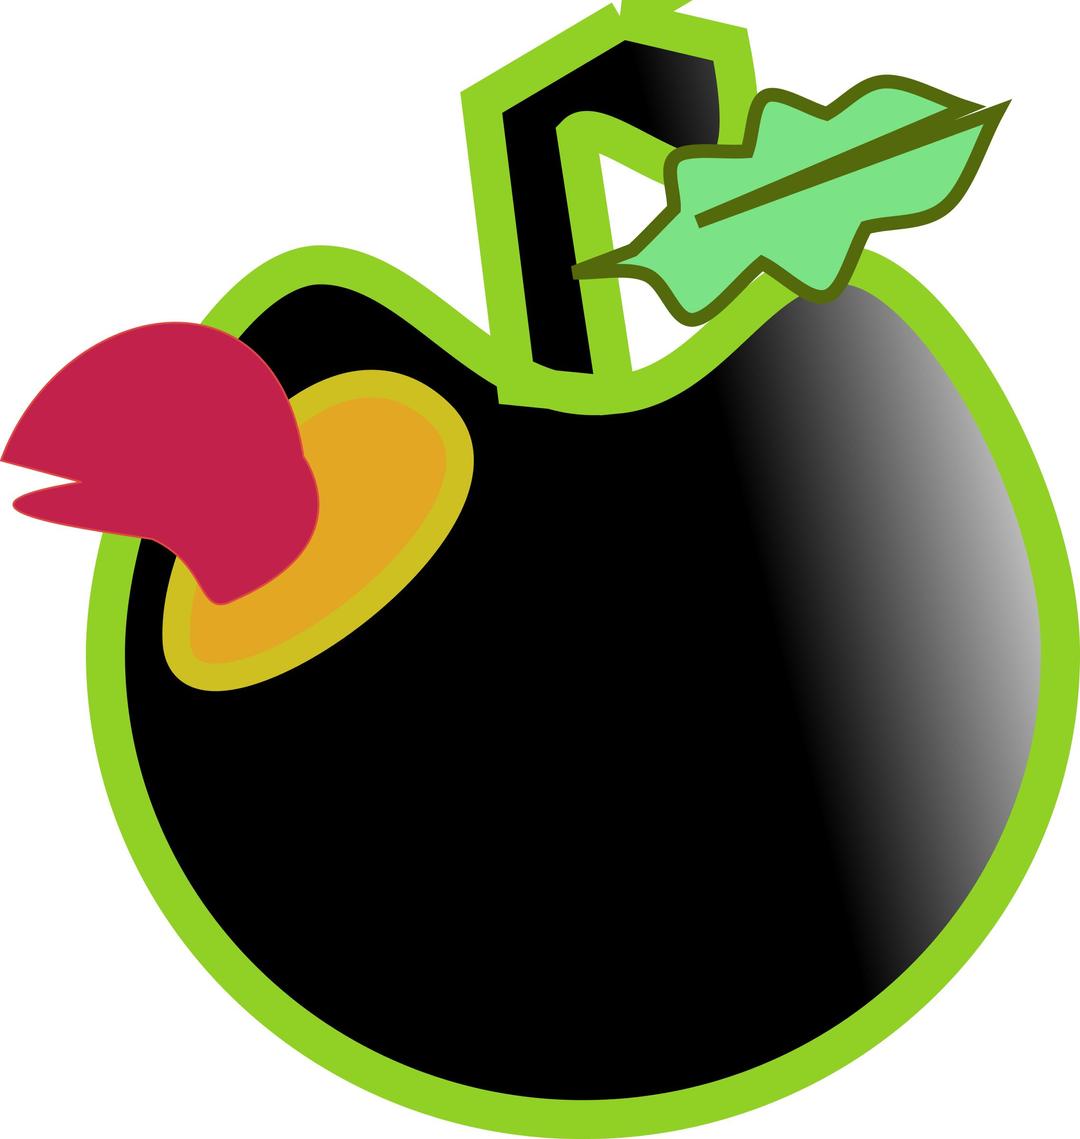 Warm and Black Apple png transparent